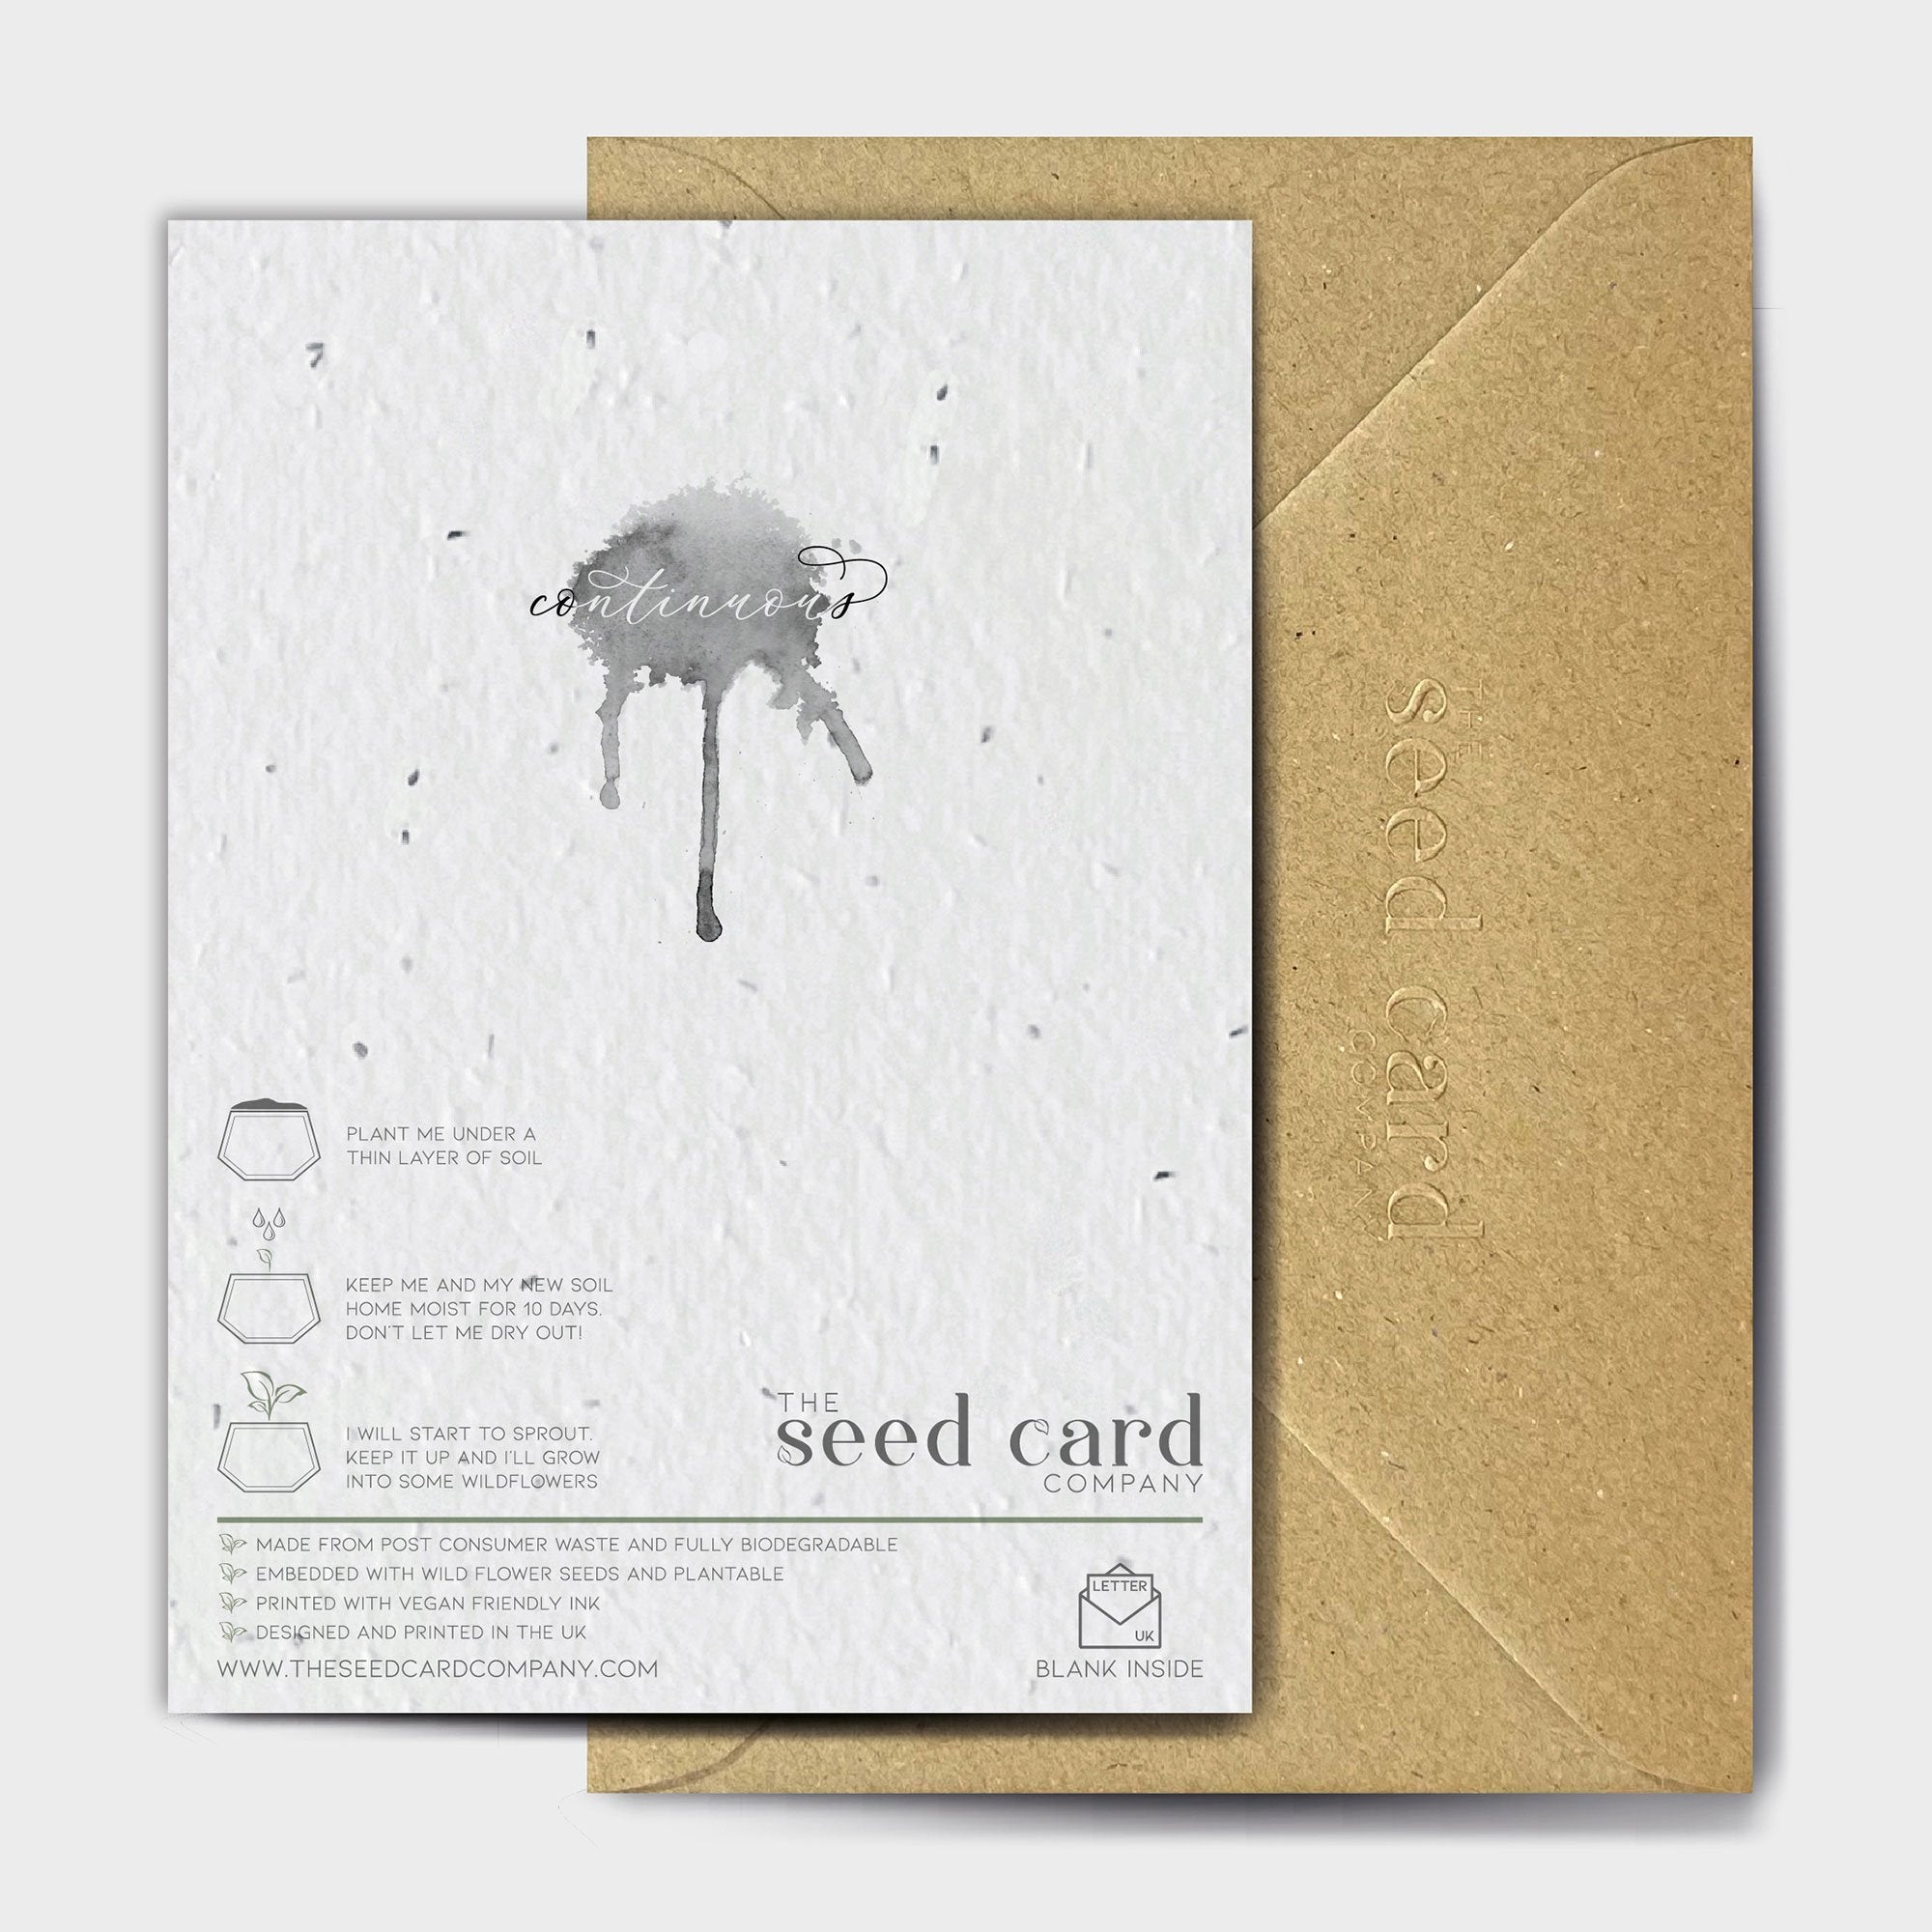 Shop online Come Here Georgie - 100% biodegradable seed-embedded cards Shop -The Seed Card Company